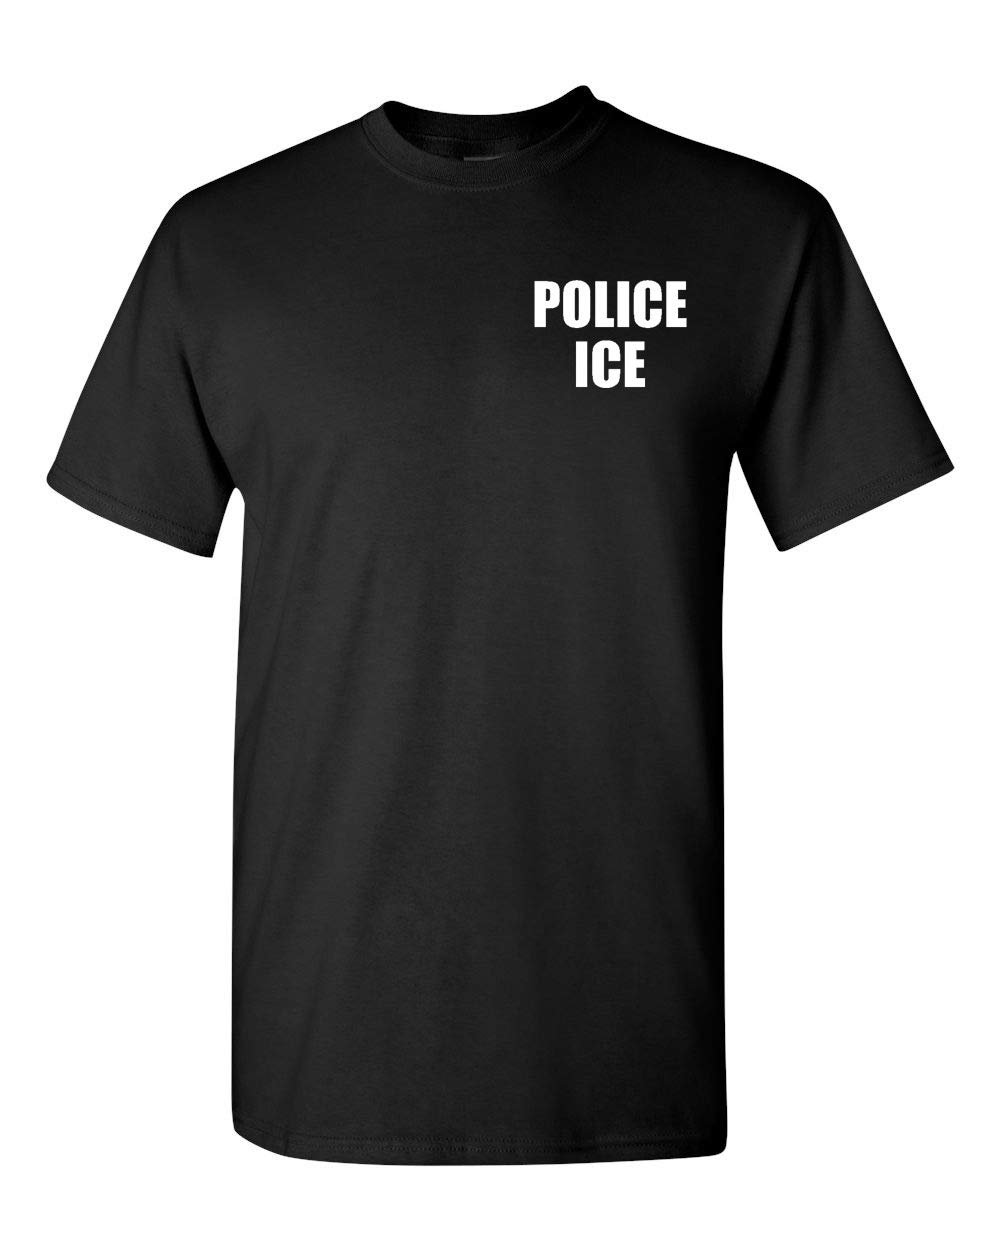 Book Cover Police ICE US Immigration Printed on Front & Back Men's T-Shirt Small Black